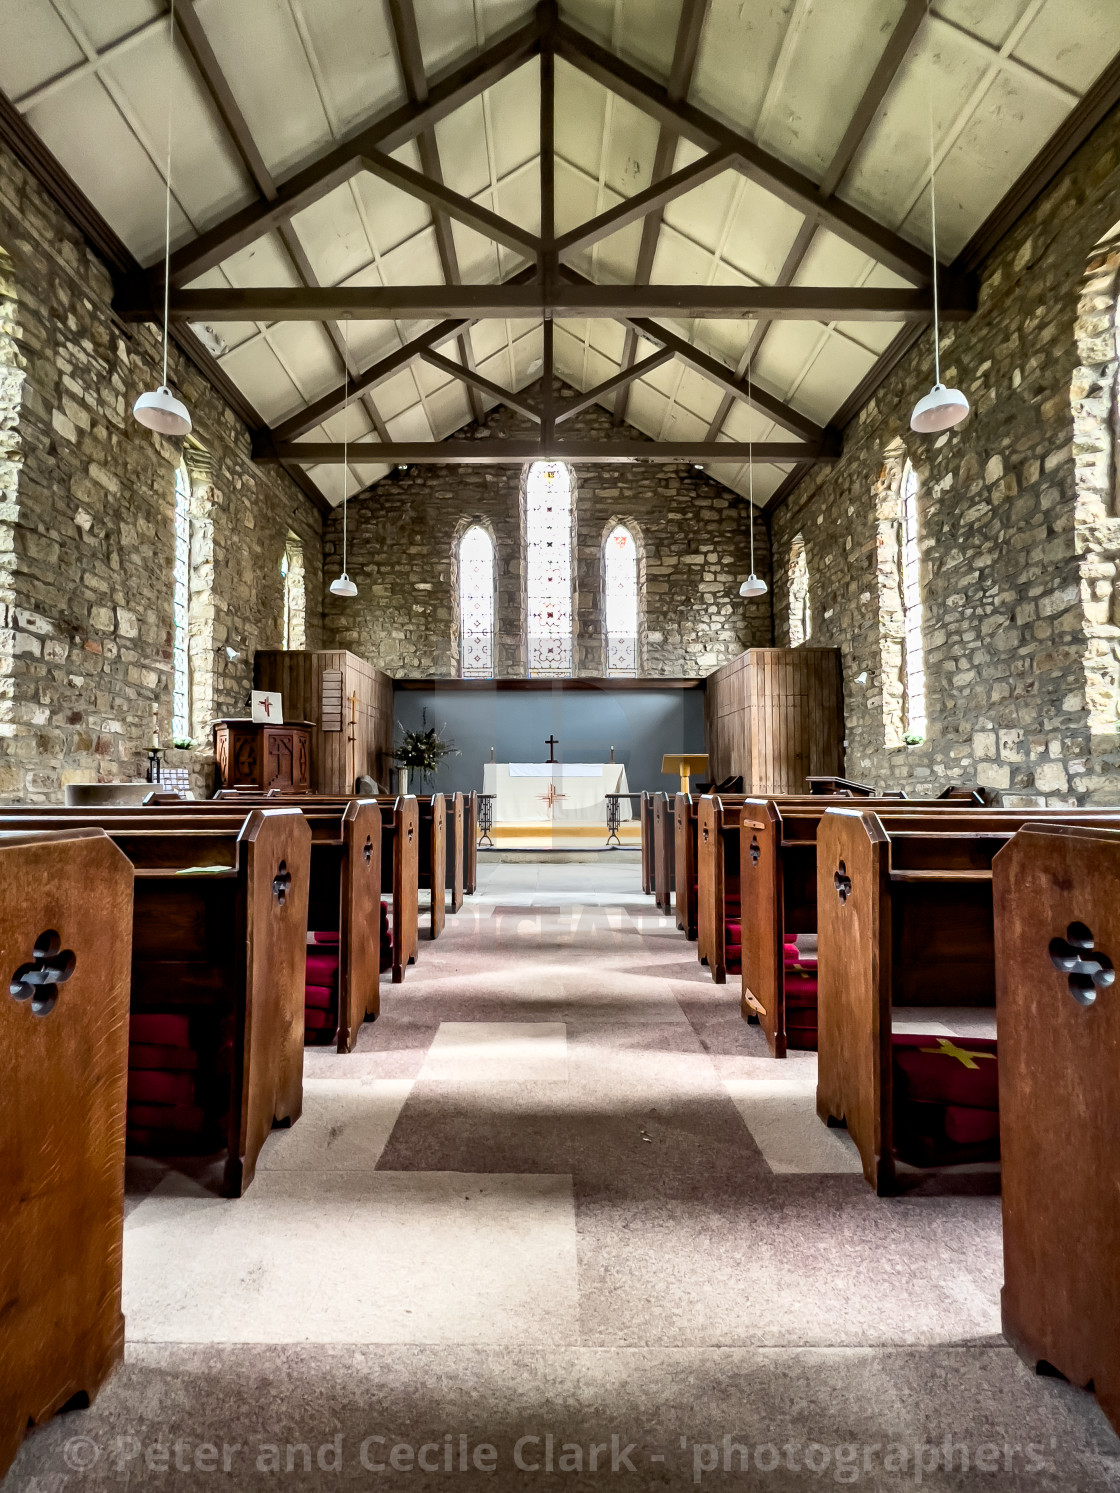 "St Mary and St Laurence Church, Pews and Interior." stock image